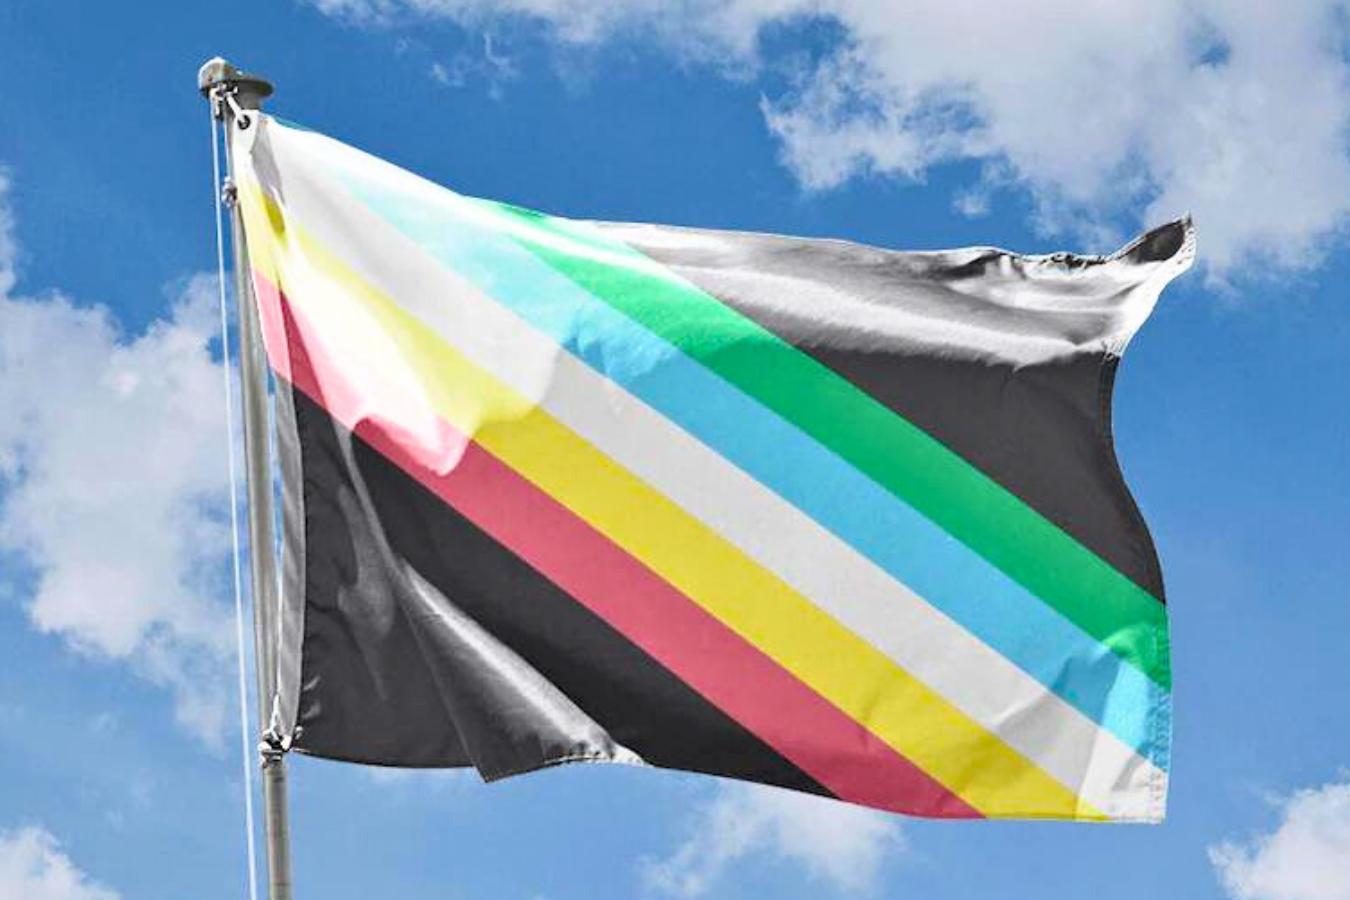 A flag appears in front of a blue cloudy sky with diagonal stripes, red, yellow, white, blue, and green on a charcoal black background.